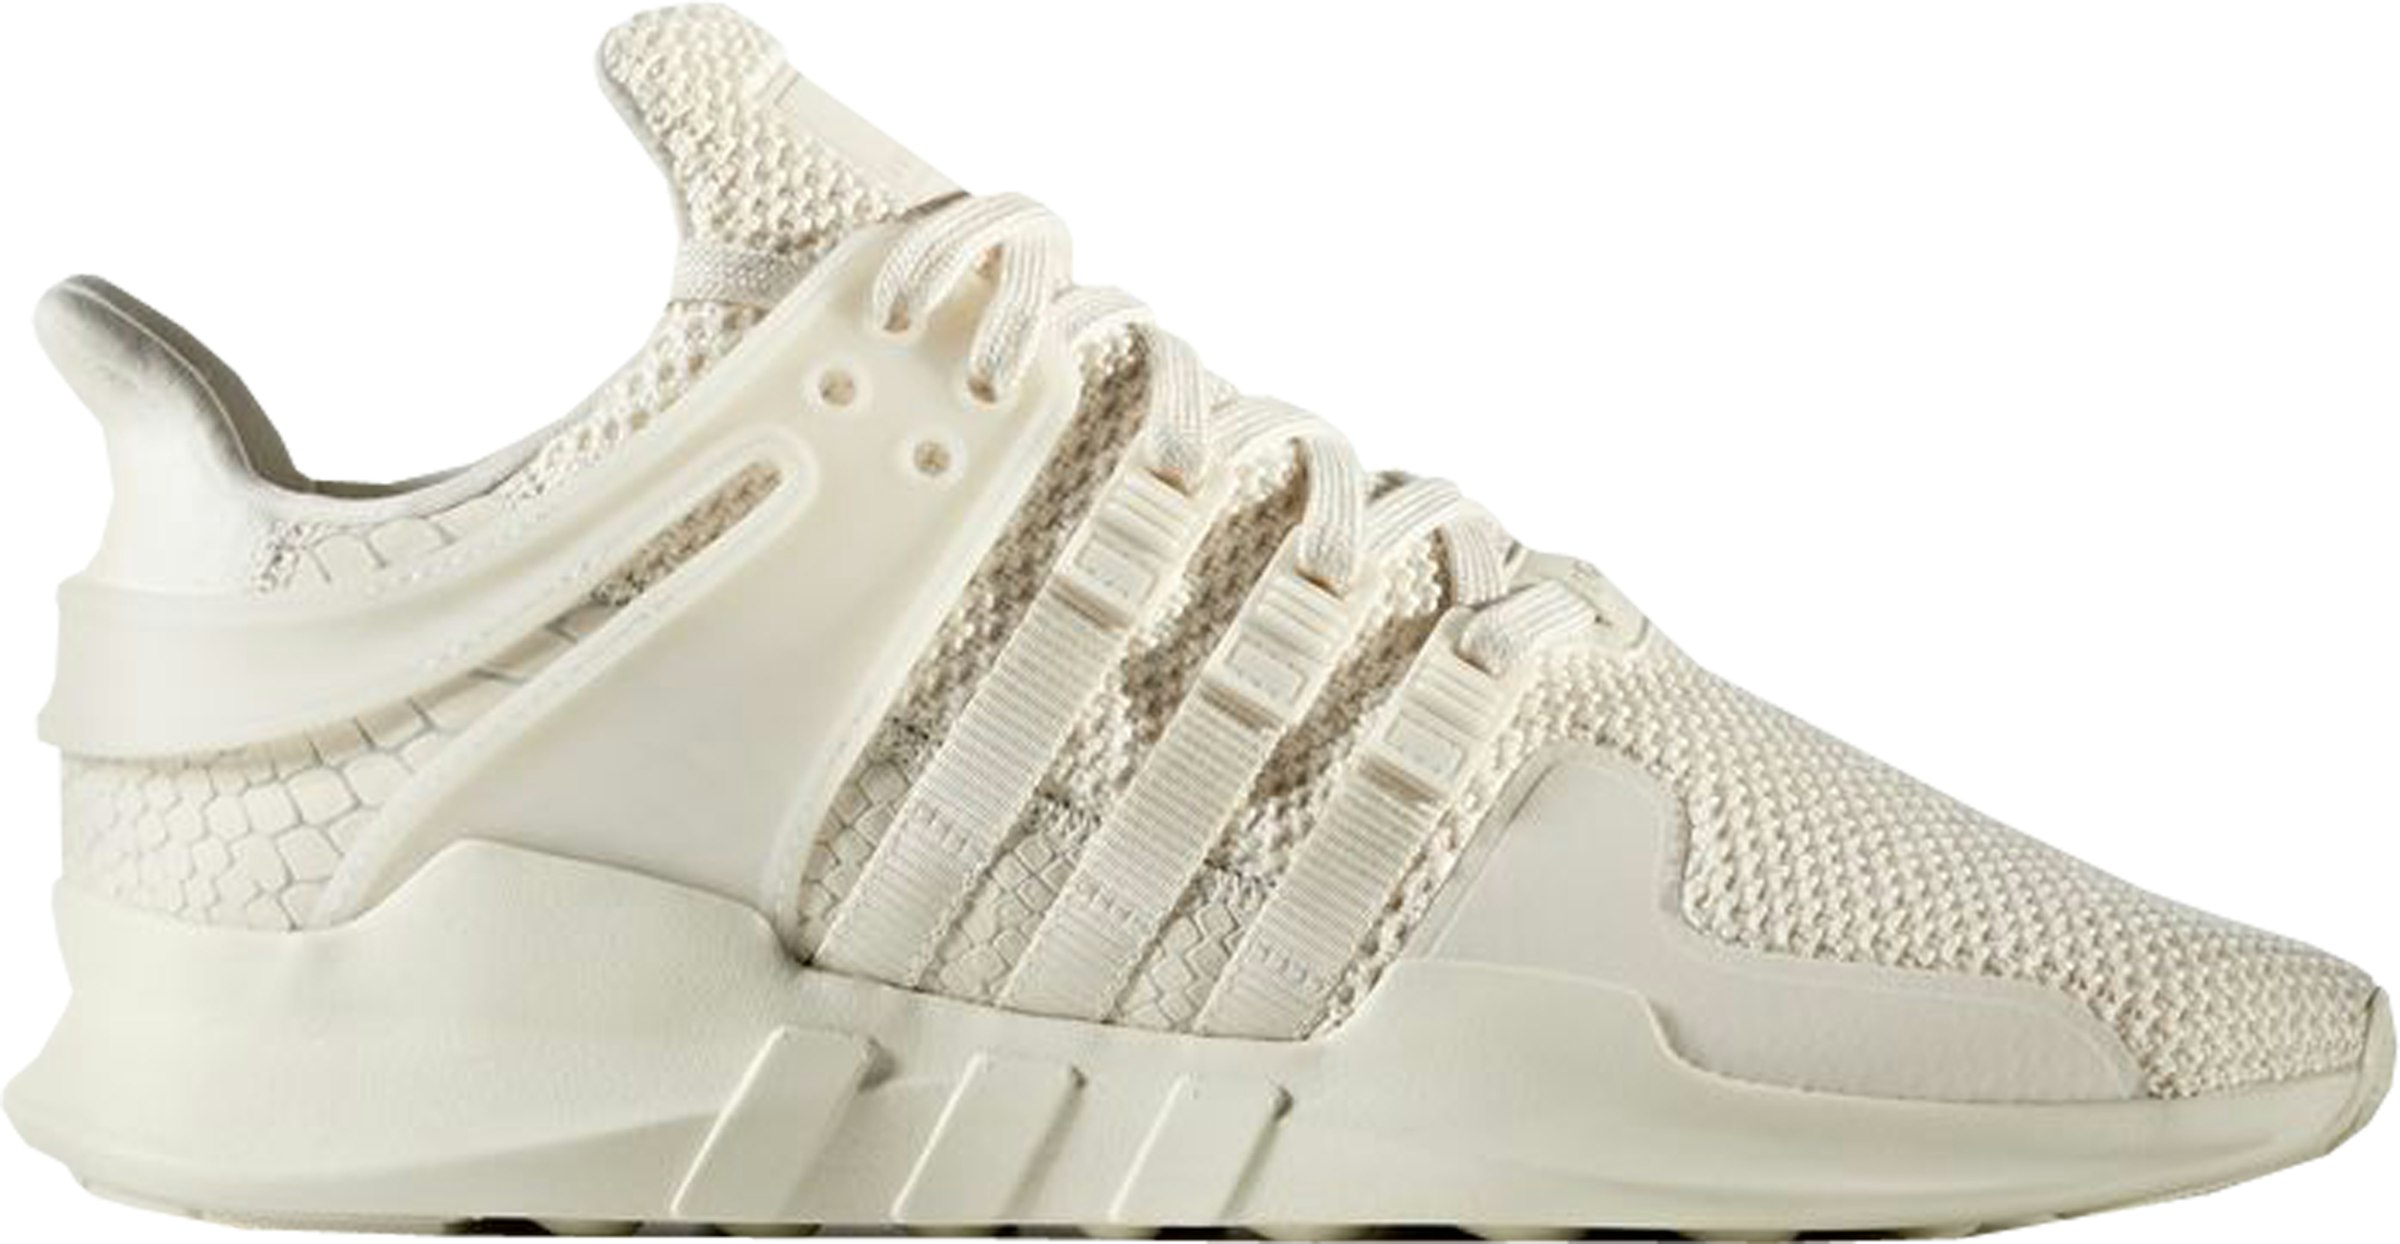 adidas EQT Support ADV Snakeskin Chalk Men's - BY9586 - US